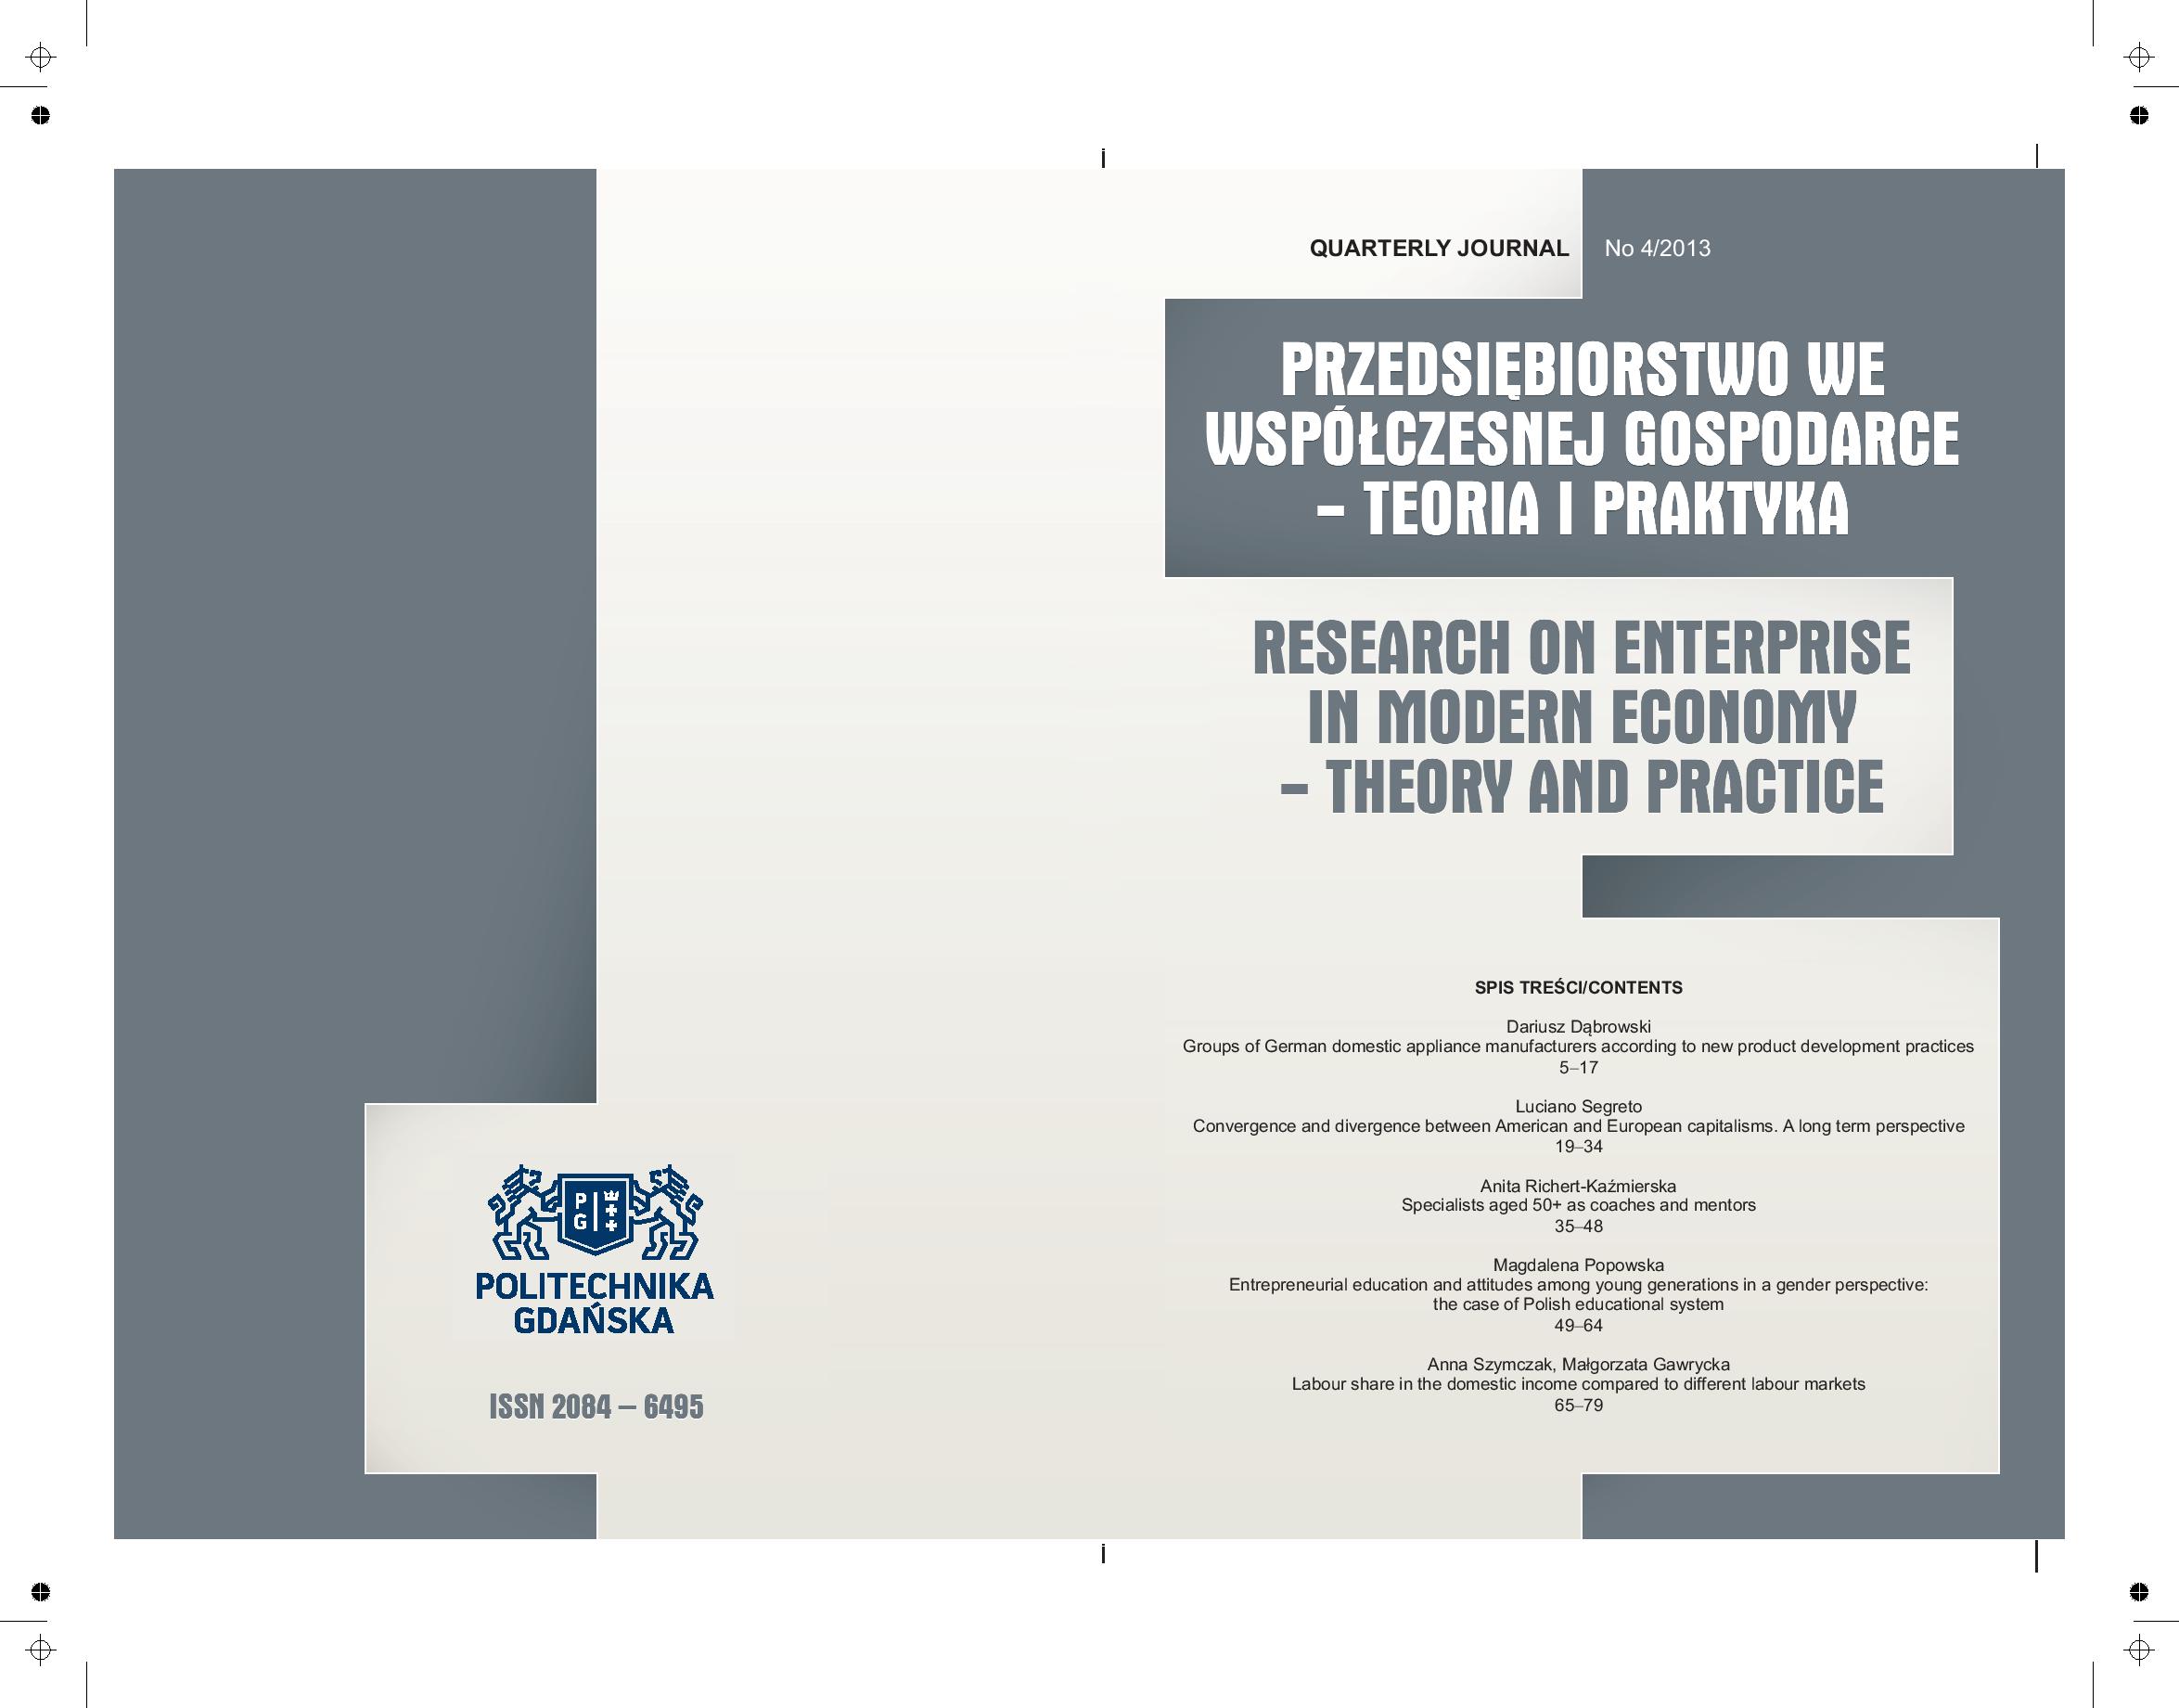 Entrepreneurial education and attitudes among young generations in a gender perspective: the case of Polish educational system Cover Image